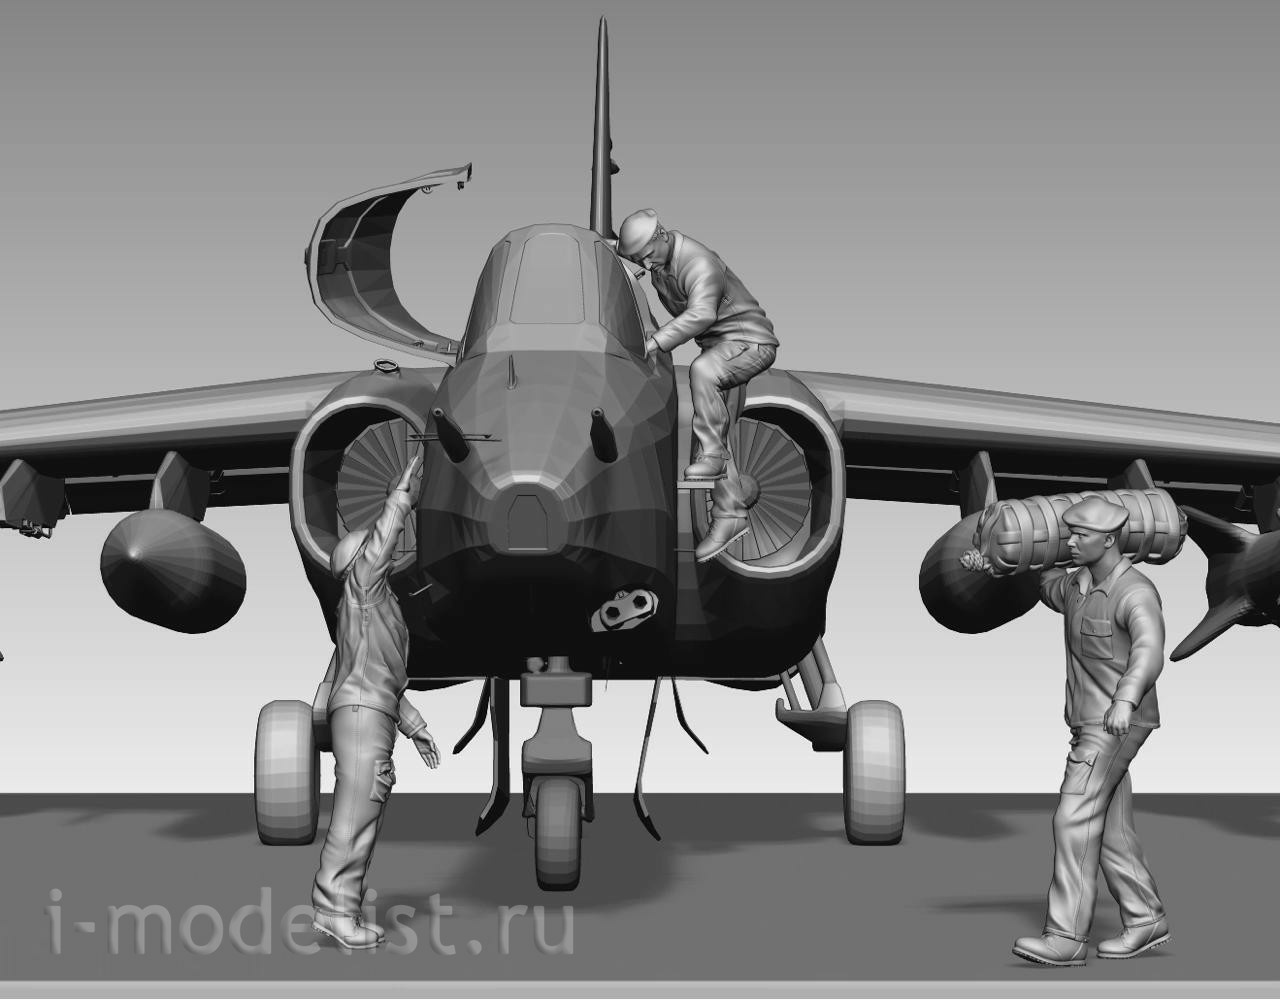 Im48009 Imodelist 1/48 Figure of technician No. 1 - work in the cabin. For the model, the Soviet Su-25 attack aircraft of the Zvezda company